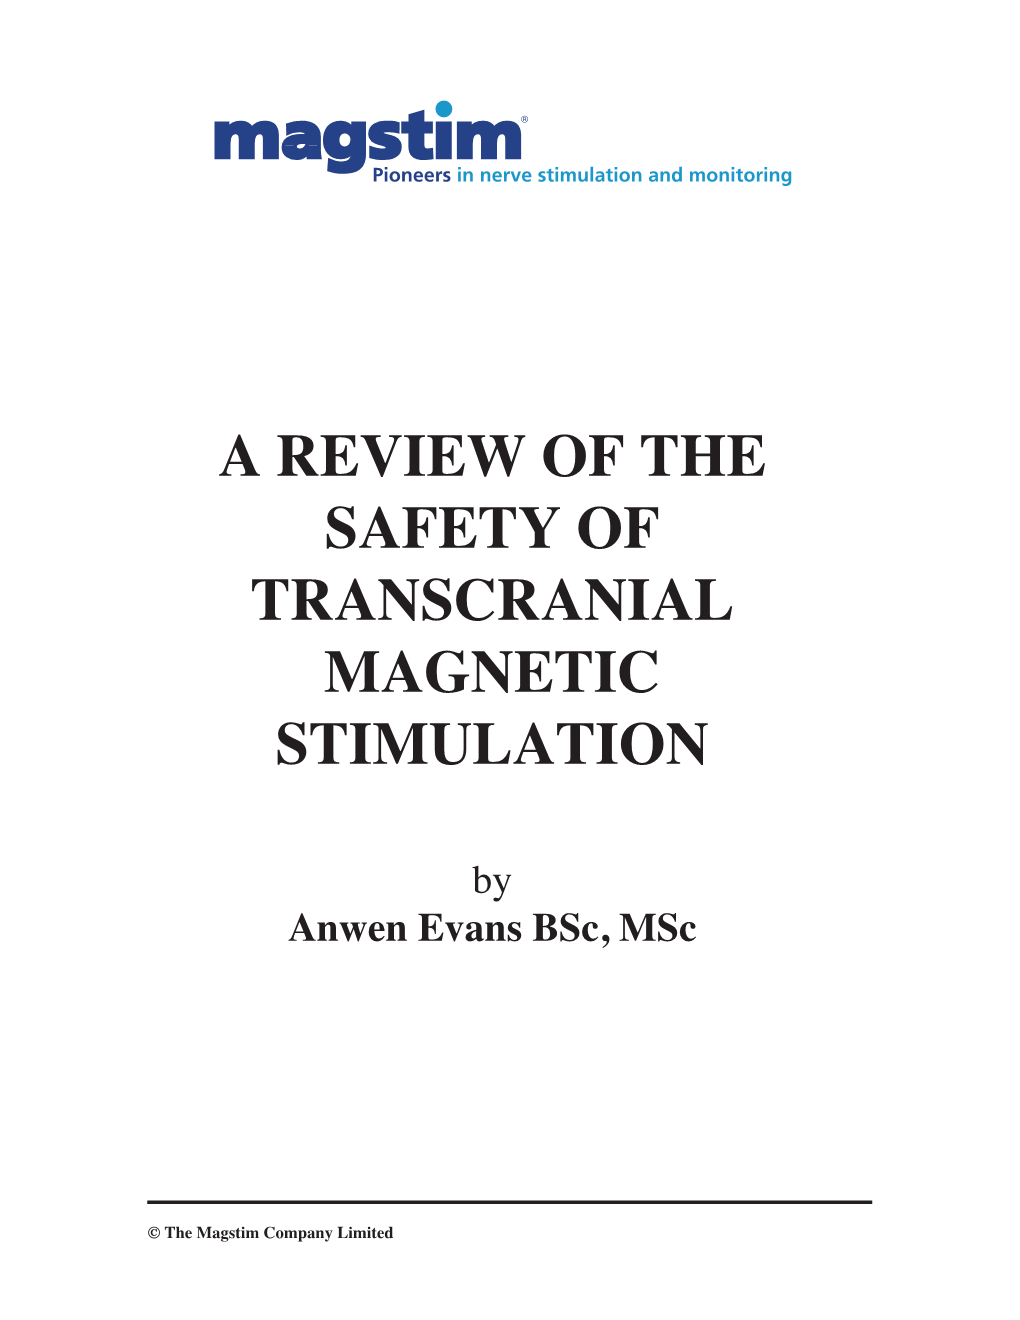 A Review of the Safety of Transcranial Magnetic Stimulation